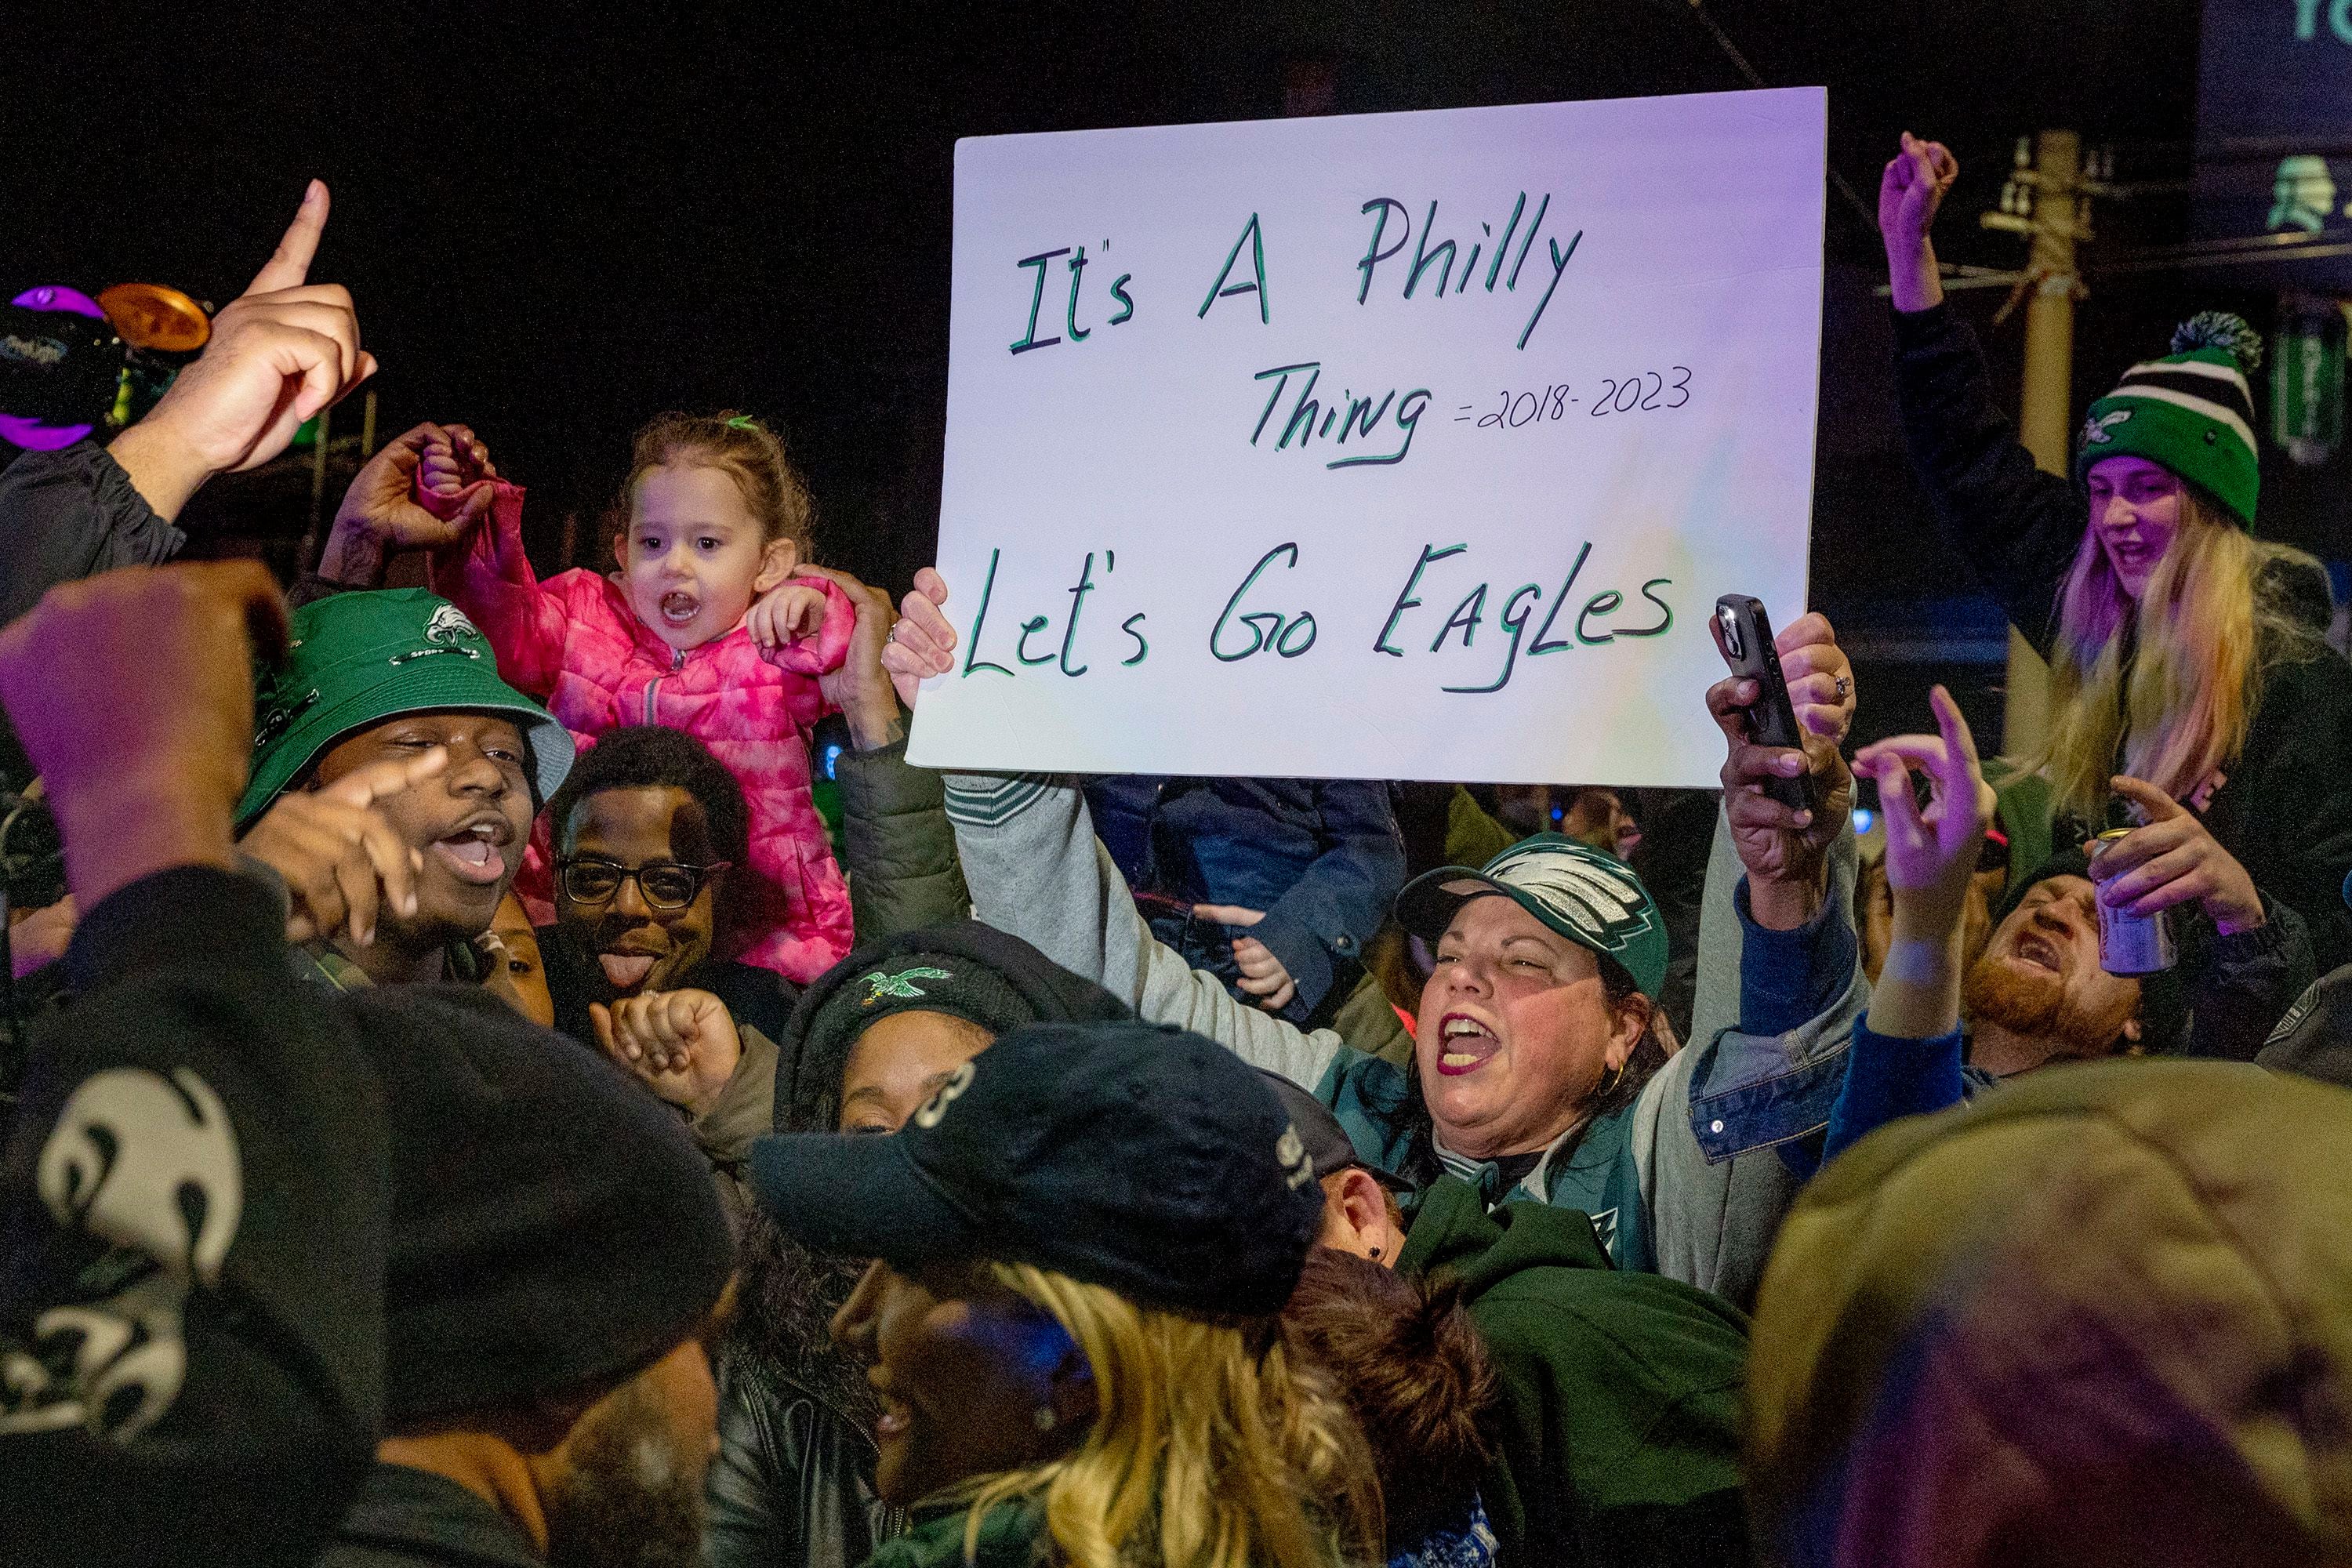 Eagles Fight Song: You Think You Know The Words, But You Don't